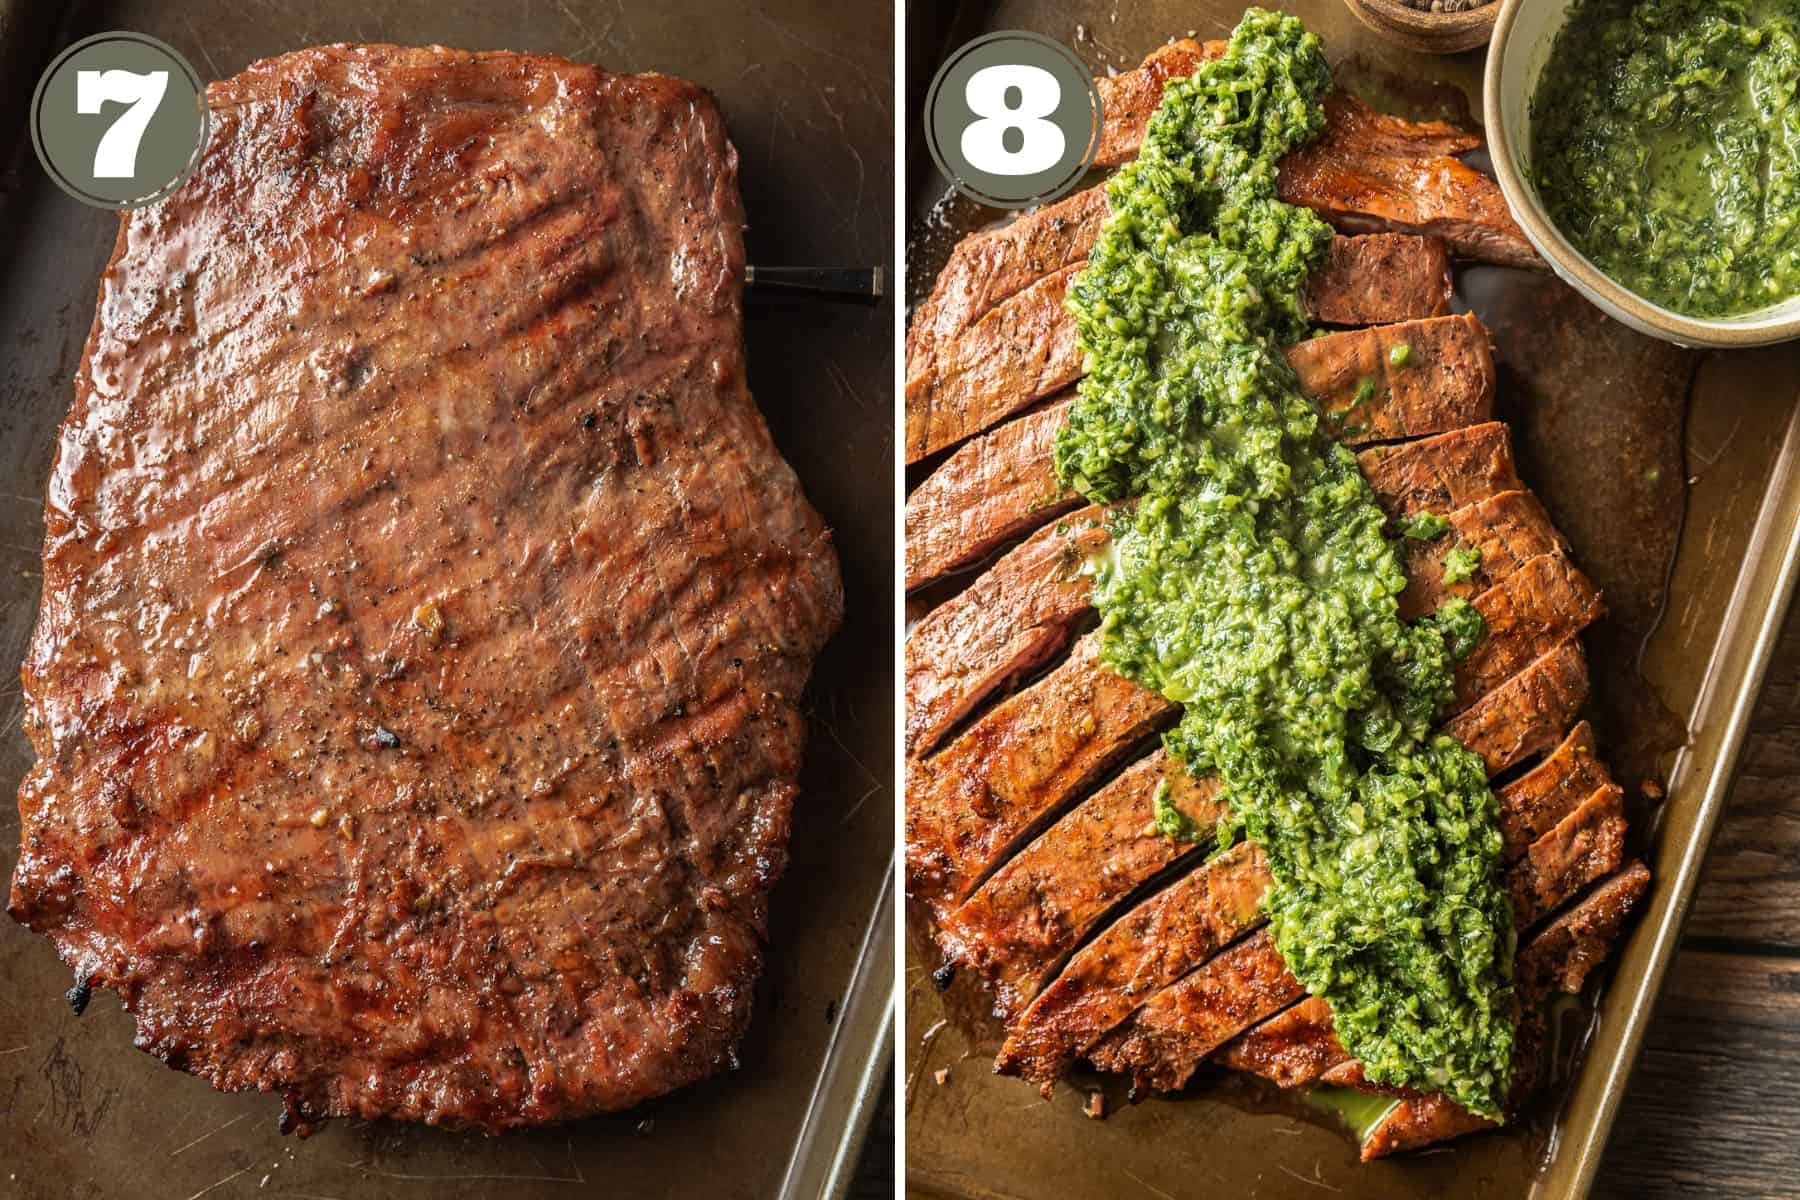 Side by side photos of a reverse seared flank steak off the grill and then sliced and topped with chimichurri sauce.